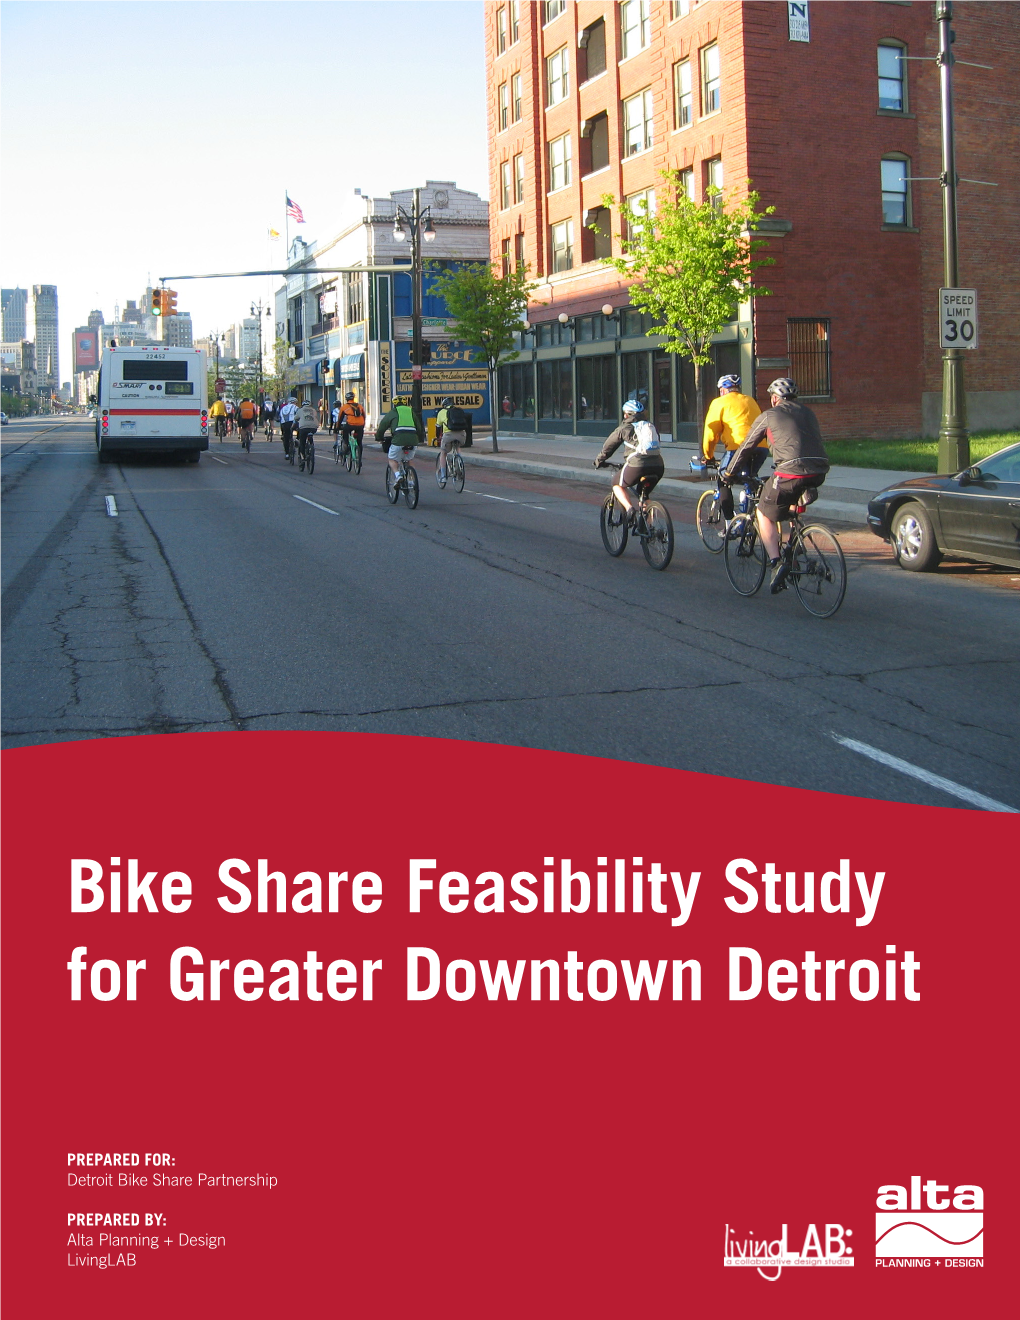 Bike Share Feasibility Study for Greater Downtown Detroit